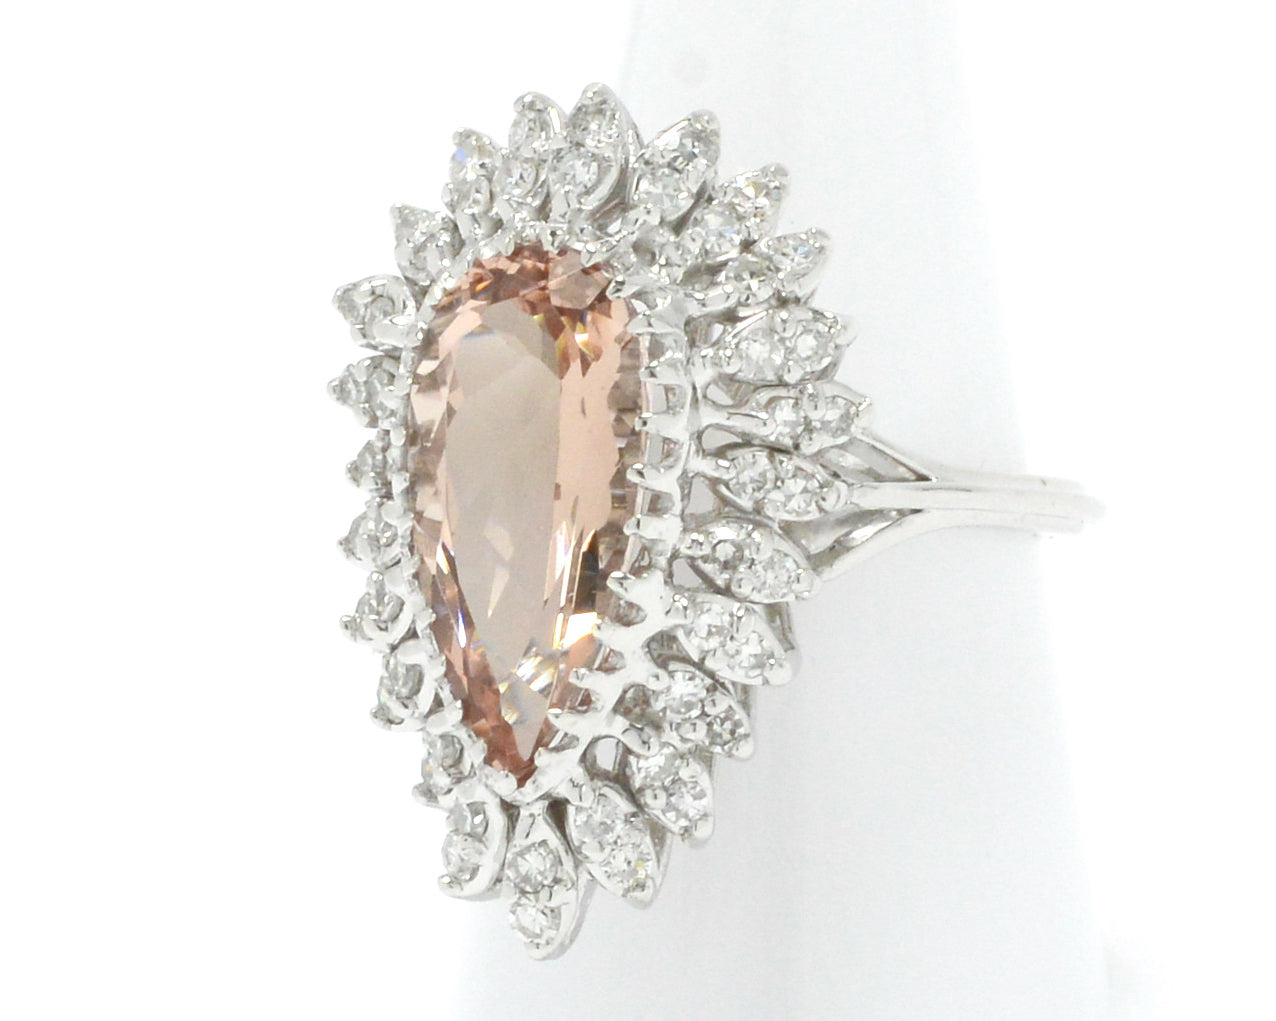 A 5 carat morganite modern estate ring with a halo of diamonds.